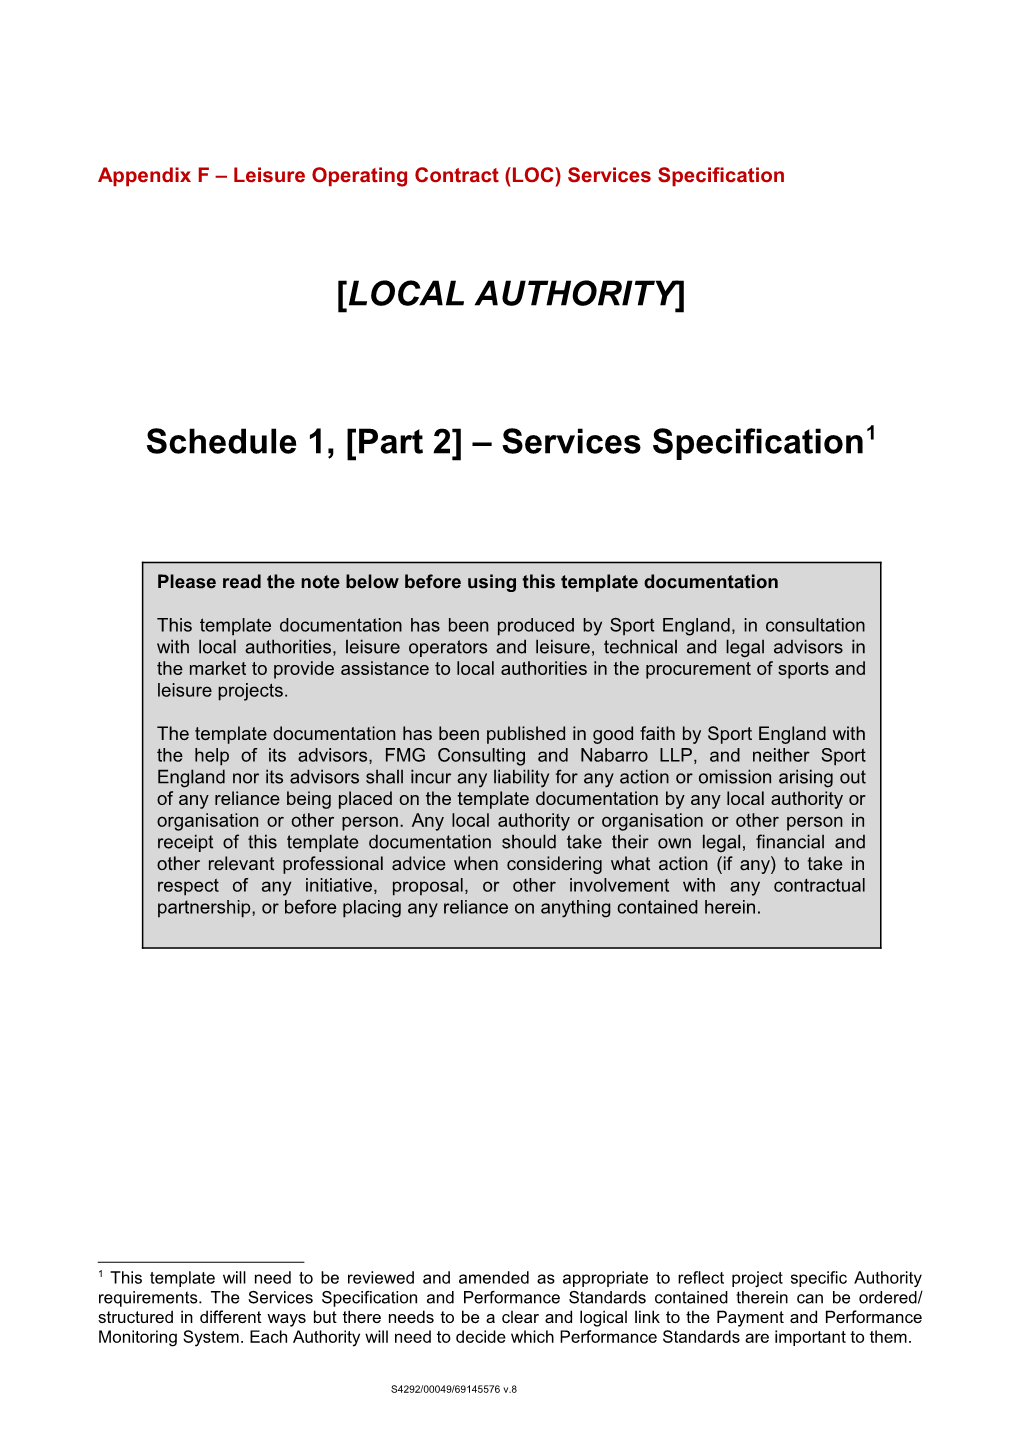 Appendix F Leisure Operating Contract (LOC) Services Specification